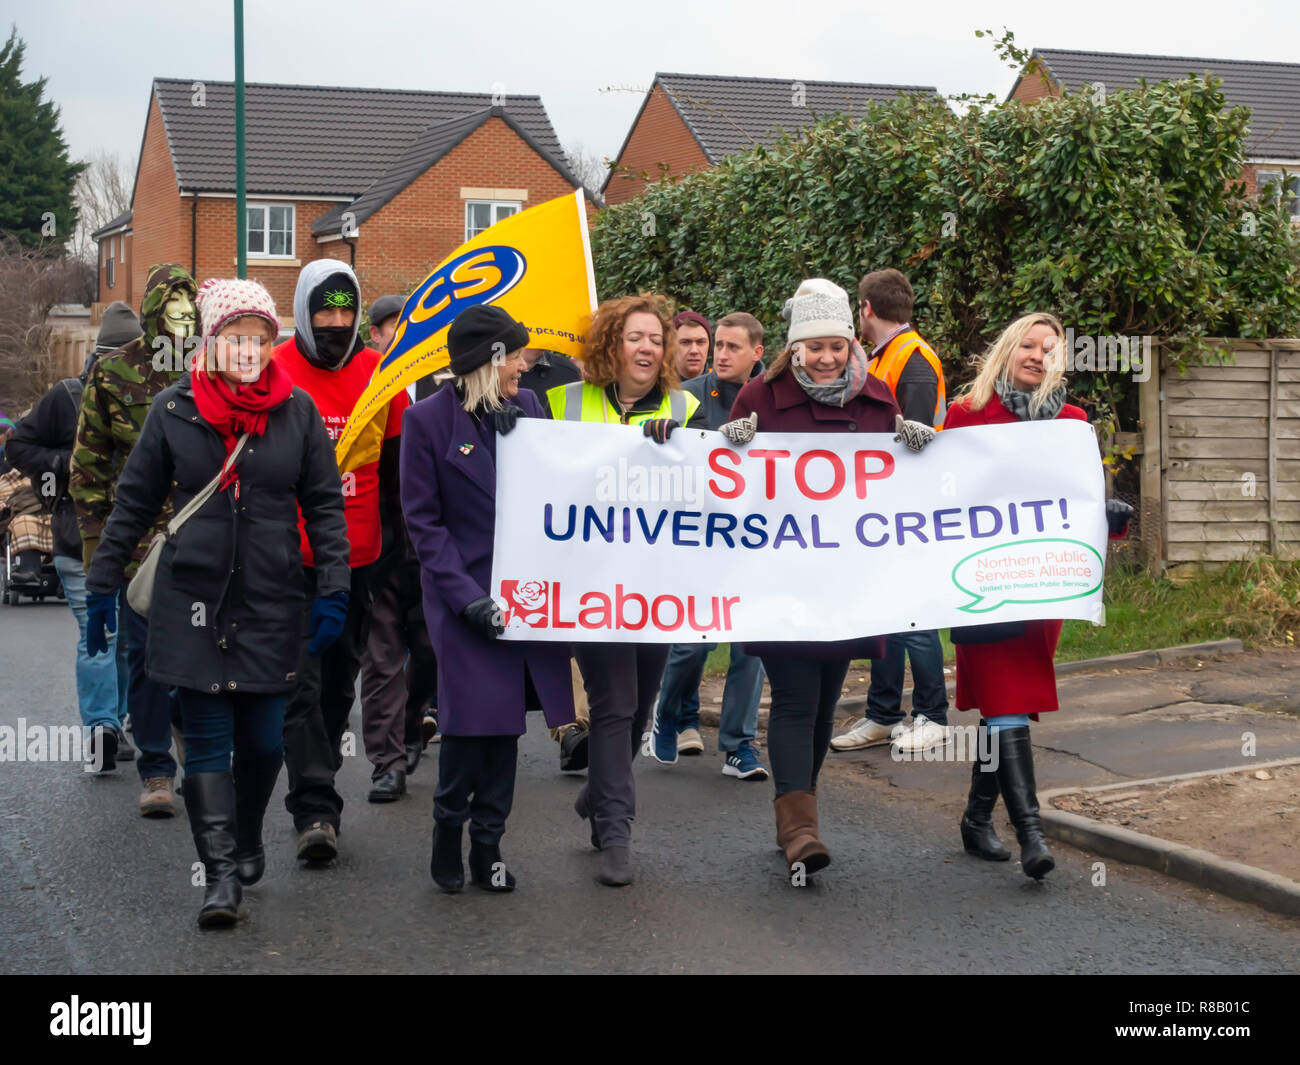 Guisborough Cleveland North Yorkshire, UK. 15th Dec, 2018.  Marchers protesting against the introduction of Universal Credit.    UC is a new benefits system with a single monthly payment replacing several other benefits, being rolled out throughout the UK.  As it is paid monthly in arrears claimants often suffer financial hardship when it is first introduced.   This marching demonstration is against Universal Credit but particularly because in this area it is being introduced before Christmas when the financial hardship will be particularly unwelcome. Credit: Peter Jordan NE/Alamy Live News Stock Photo